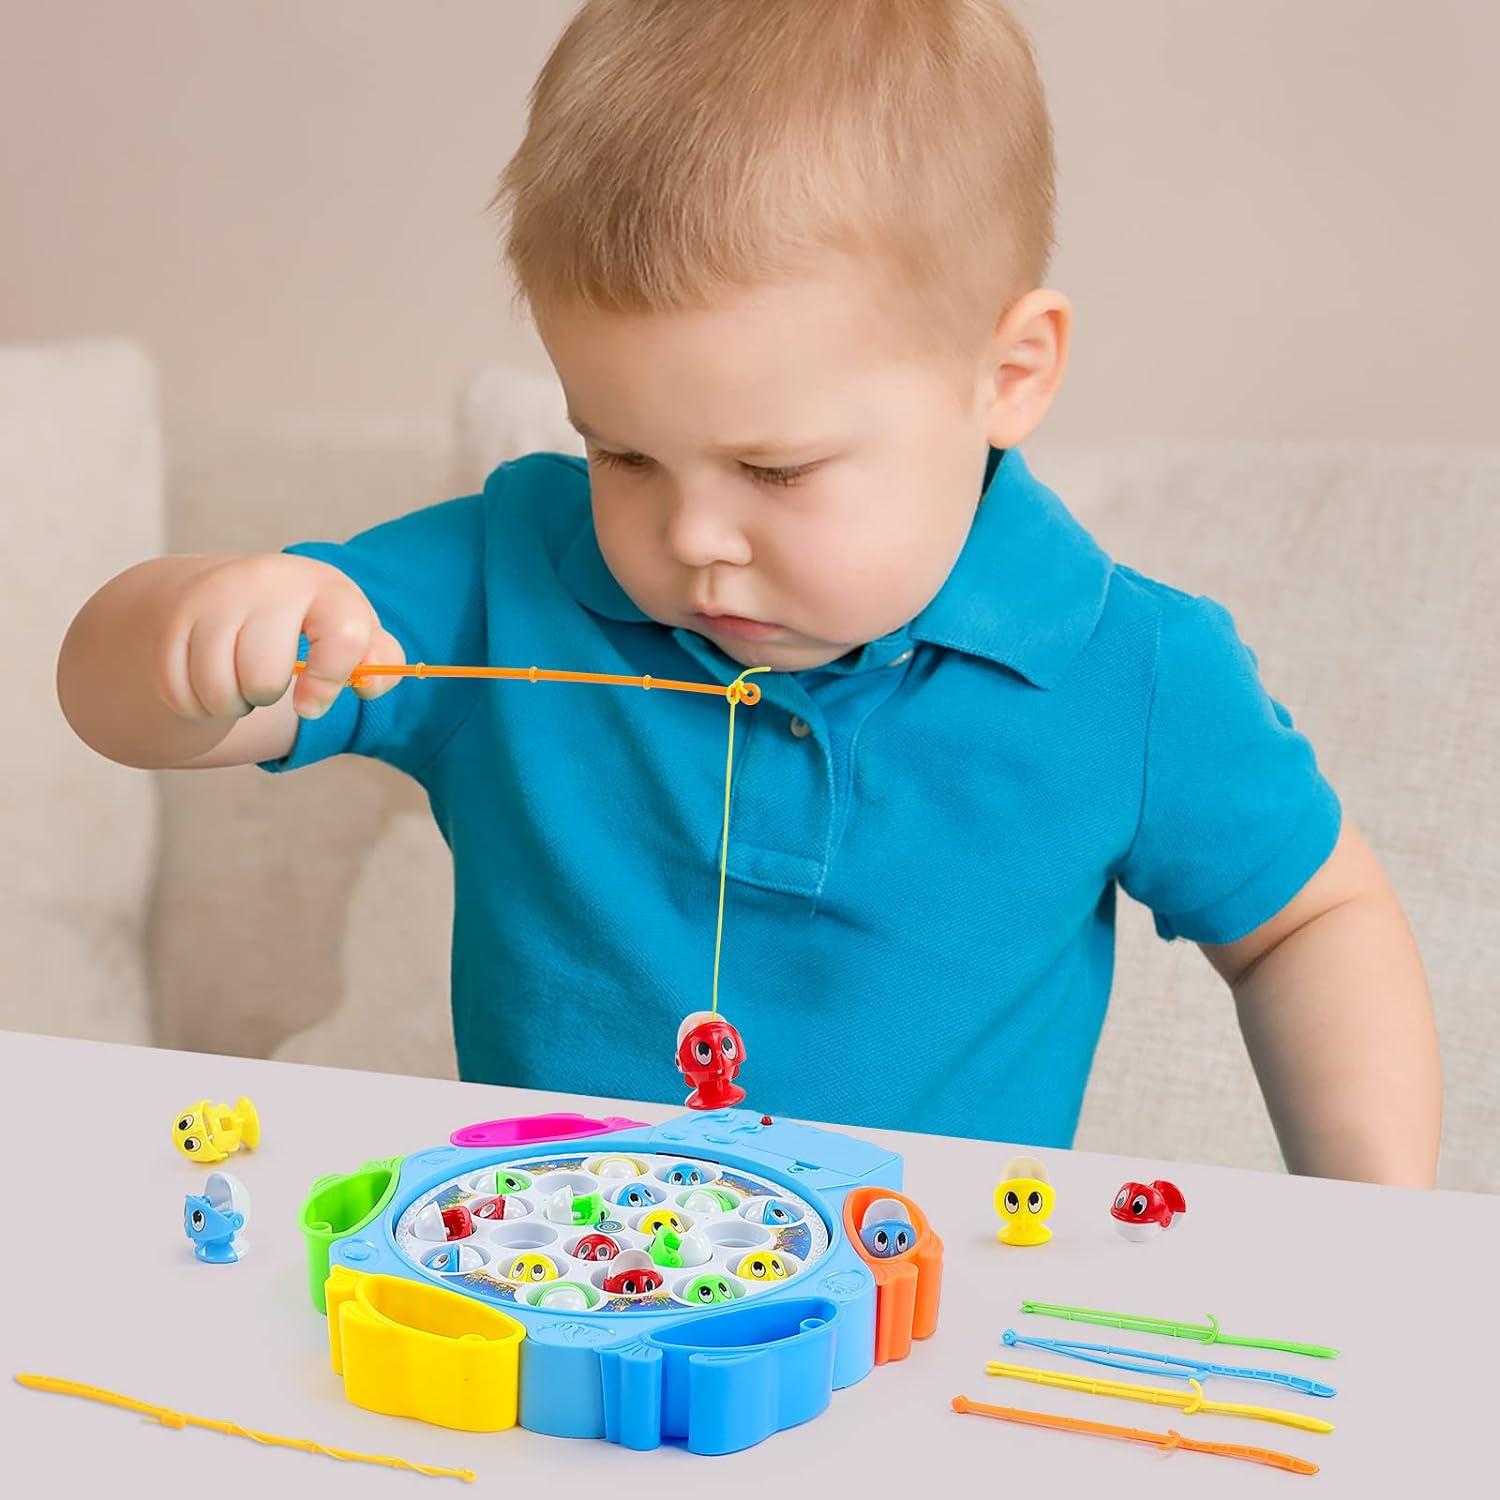 SR Toys Magnetic Fishing Toy Game with Fishing Rod and Colourful Fishes, a  Role Play Game for Kids (Multicolor) - Magnetic Fishing Toy Game with  Fishing Rod and Colourful Fishes, a Role